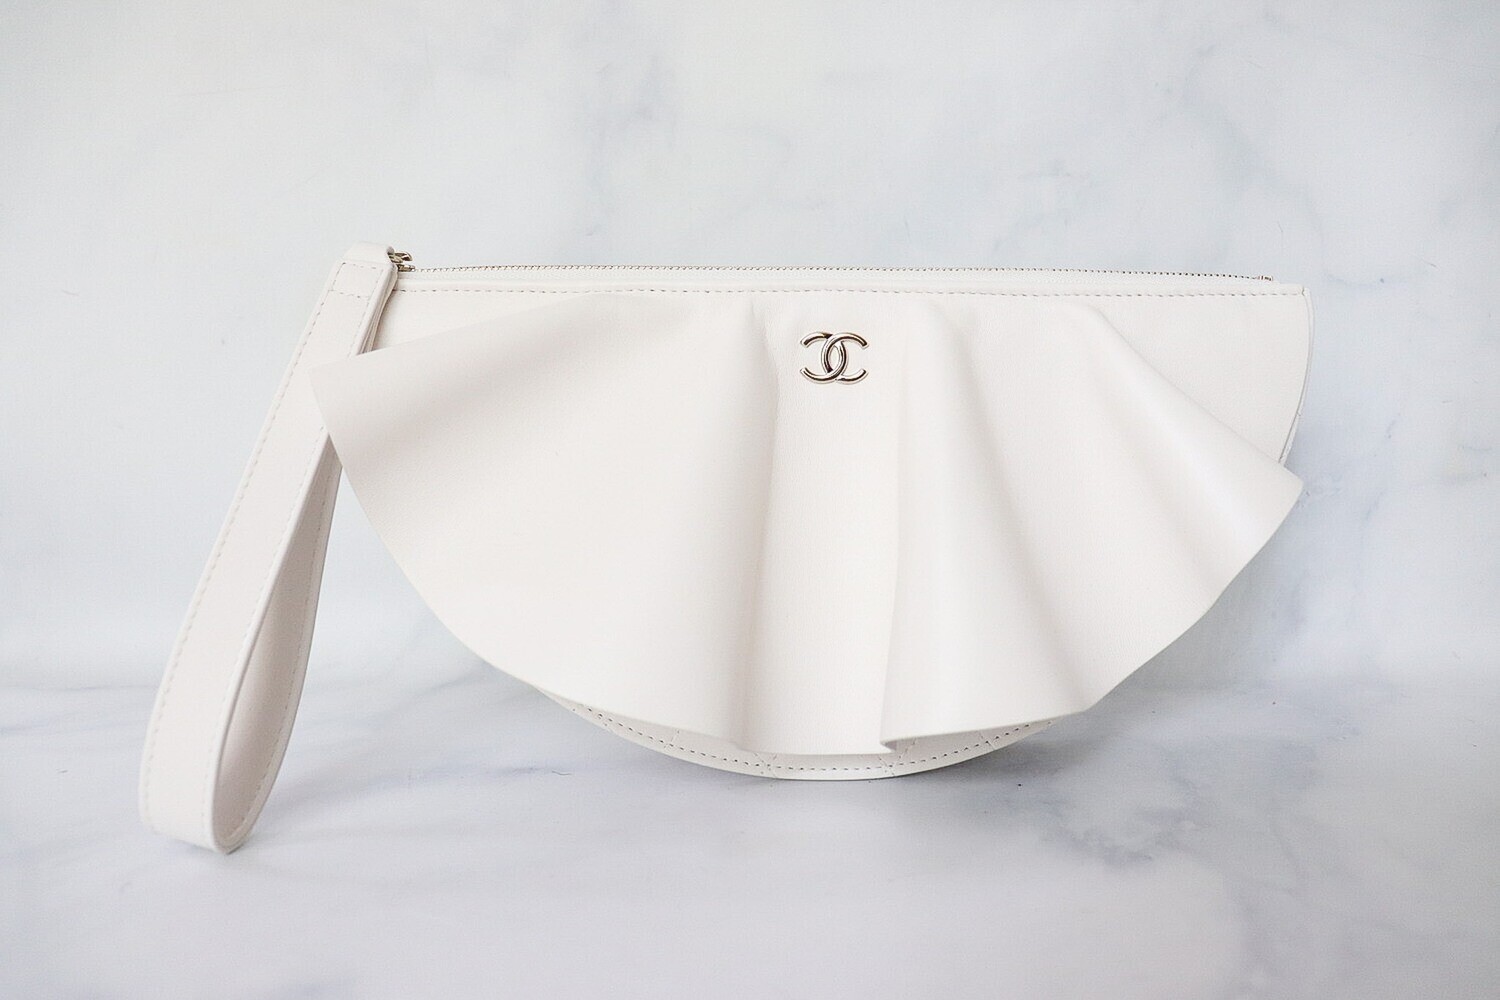 Chanel Black/White CC Embroidered Clutch with Chain Bag - Yoogi's Closet